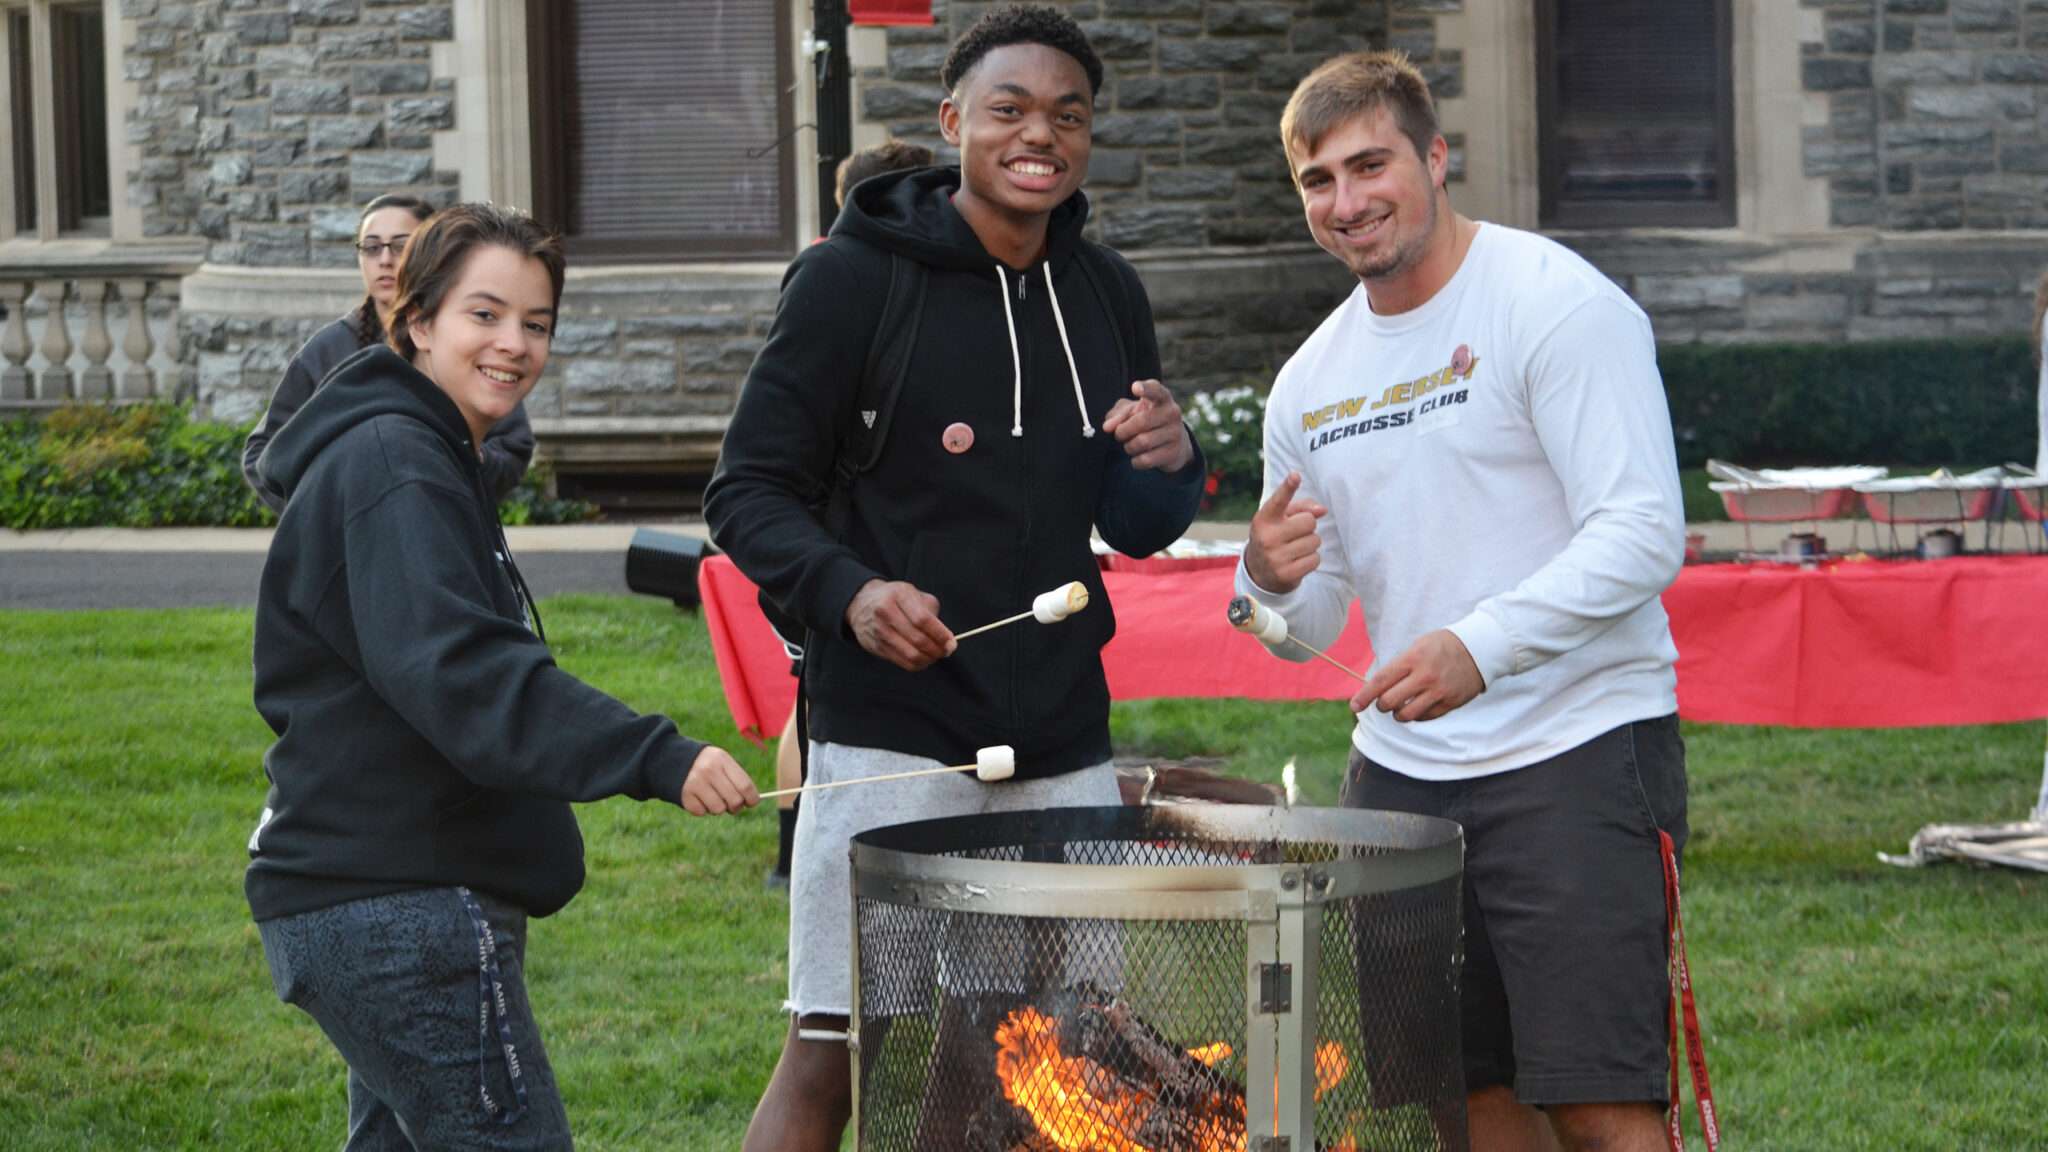 Honors students at a barbecue for Swarm.